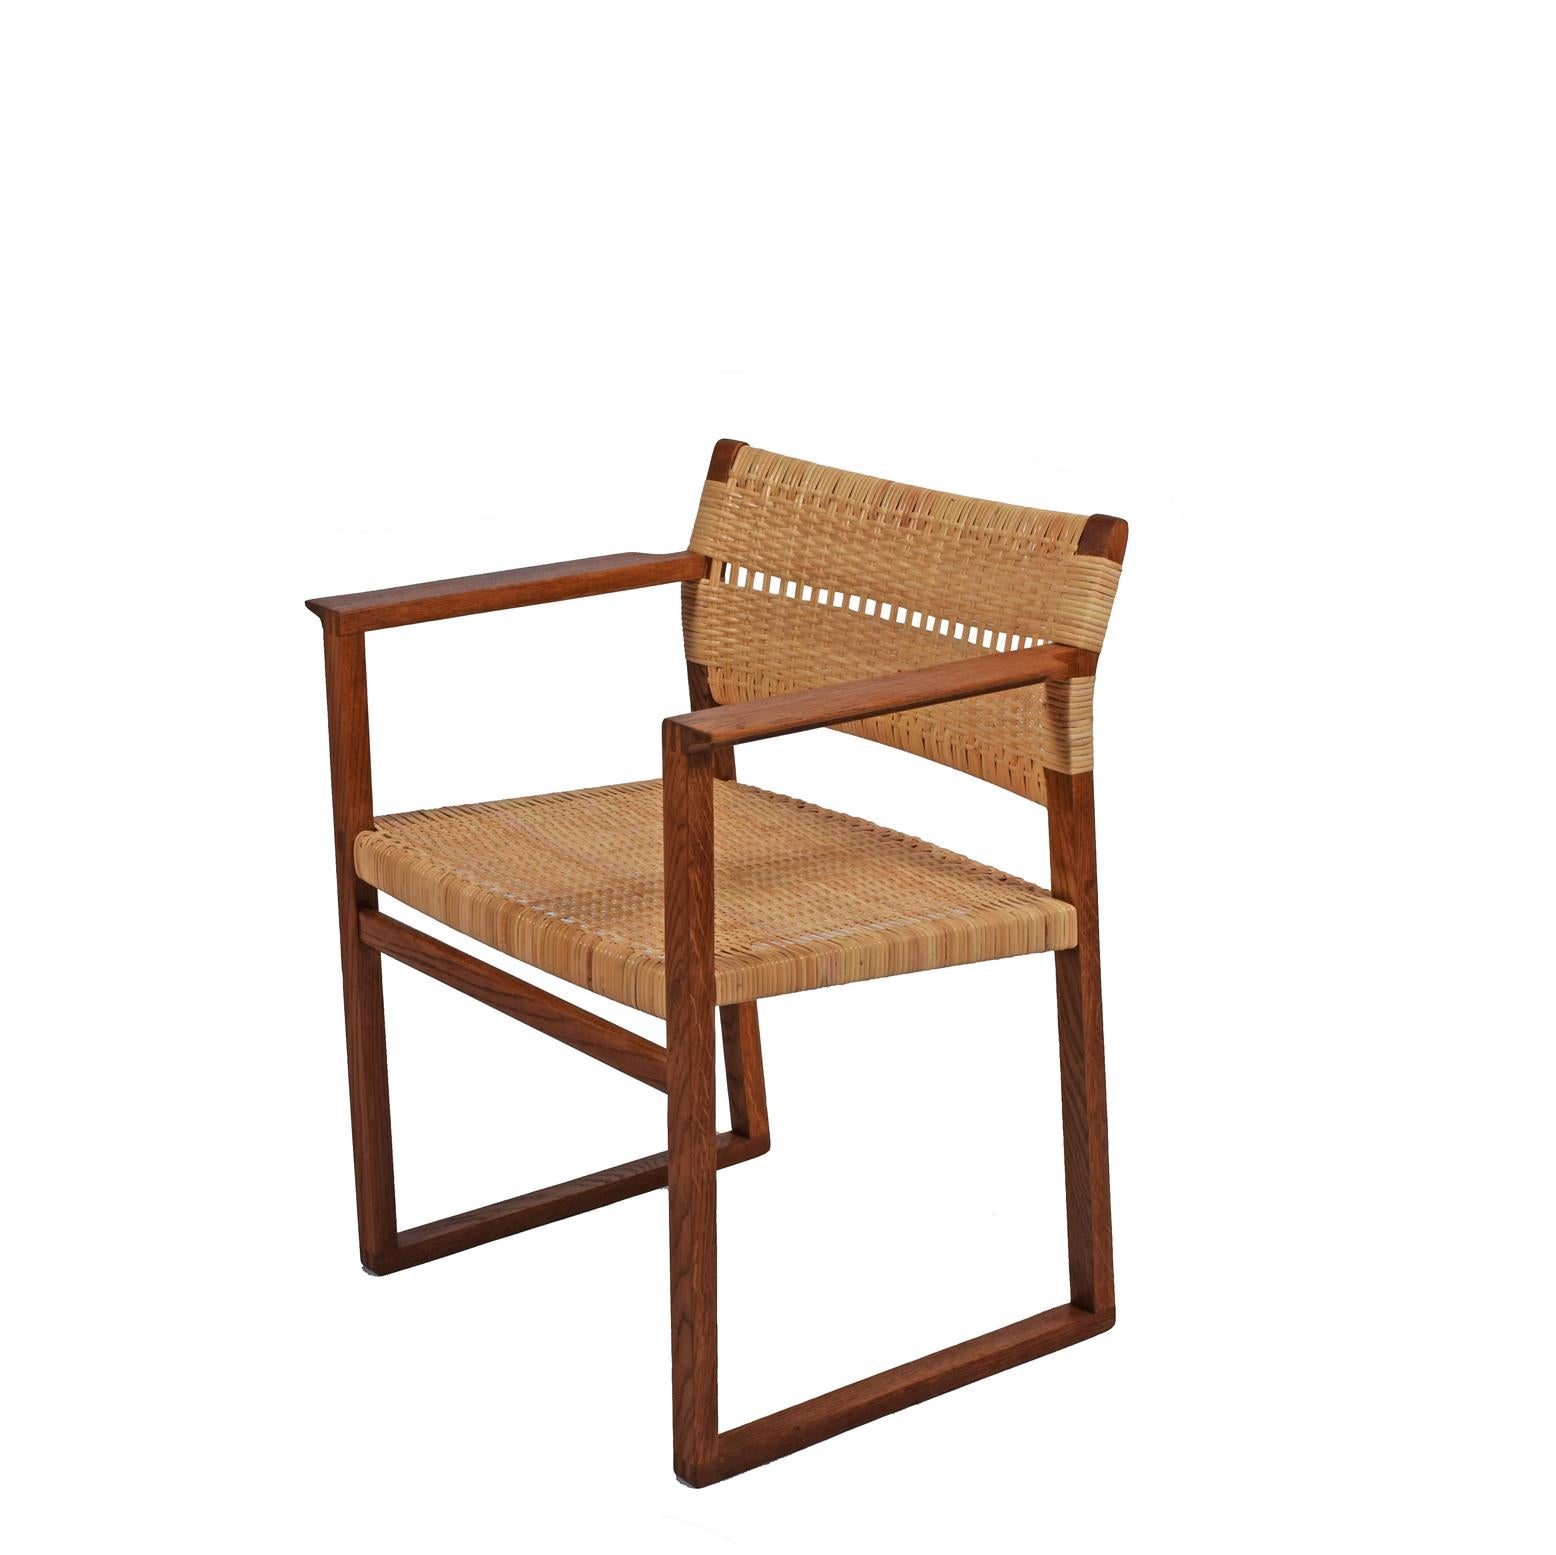 Armchair design by Borge Mogensen in 1957 solid oak with expose joinery new cane manufacture by P. Lauritsen.